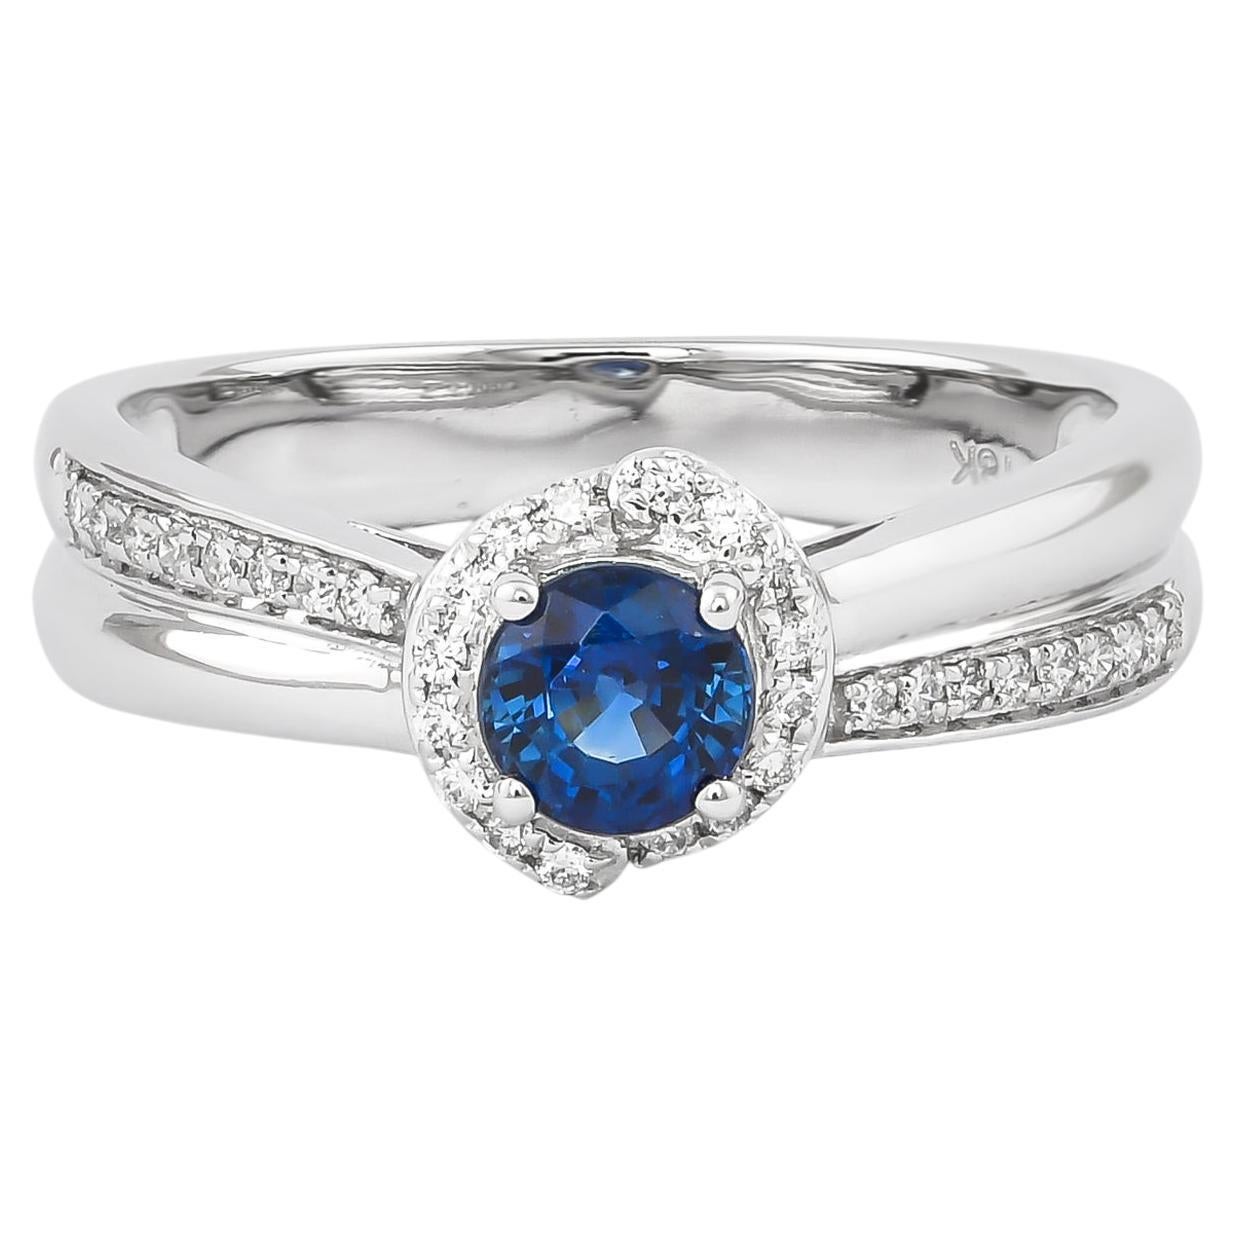 0.5 Carat Blue Sapphire and Diamond Ring in 18 Karat White Gold For Sale